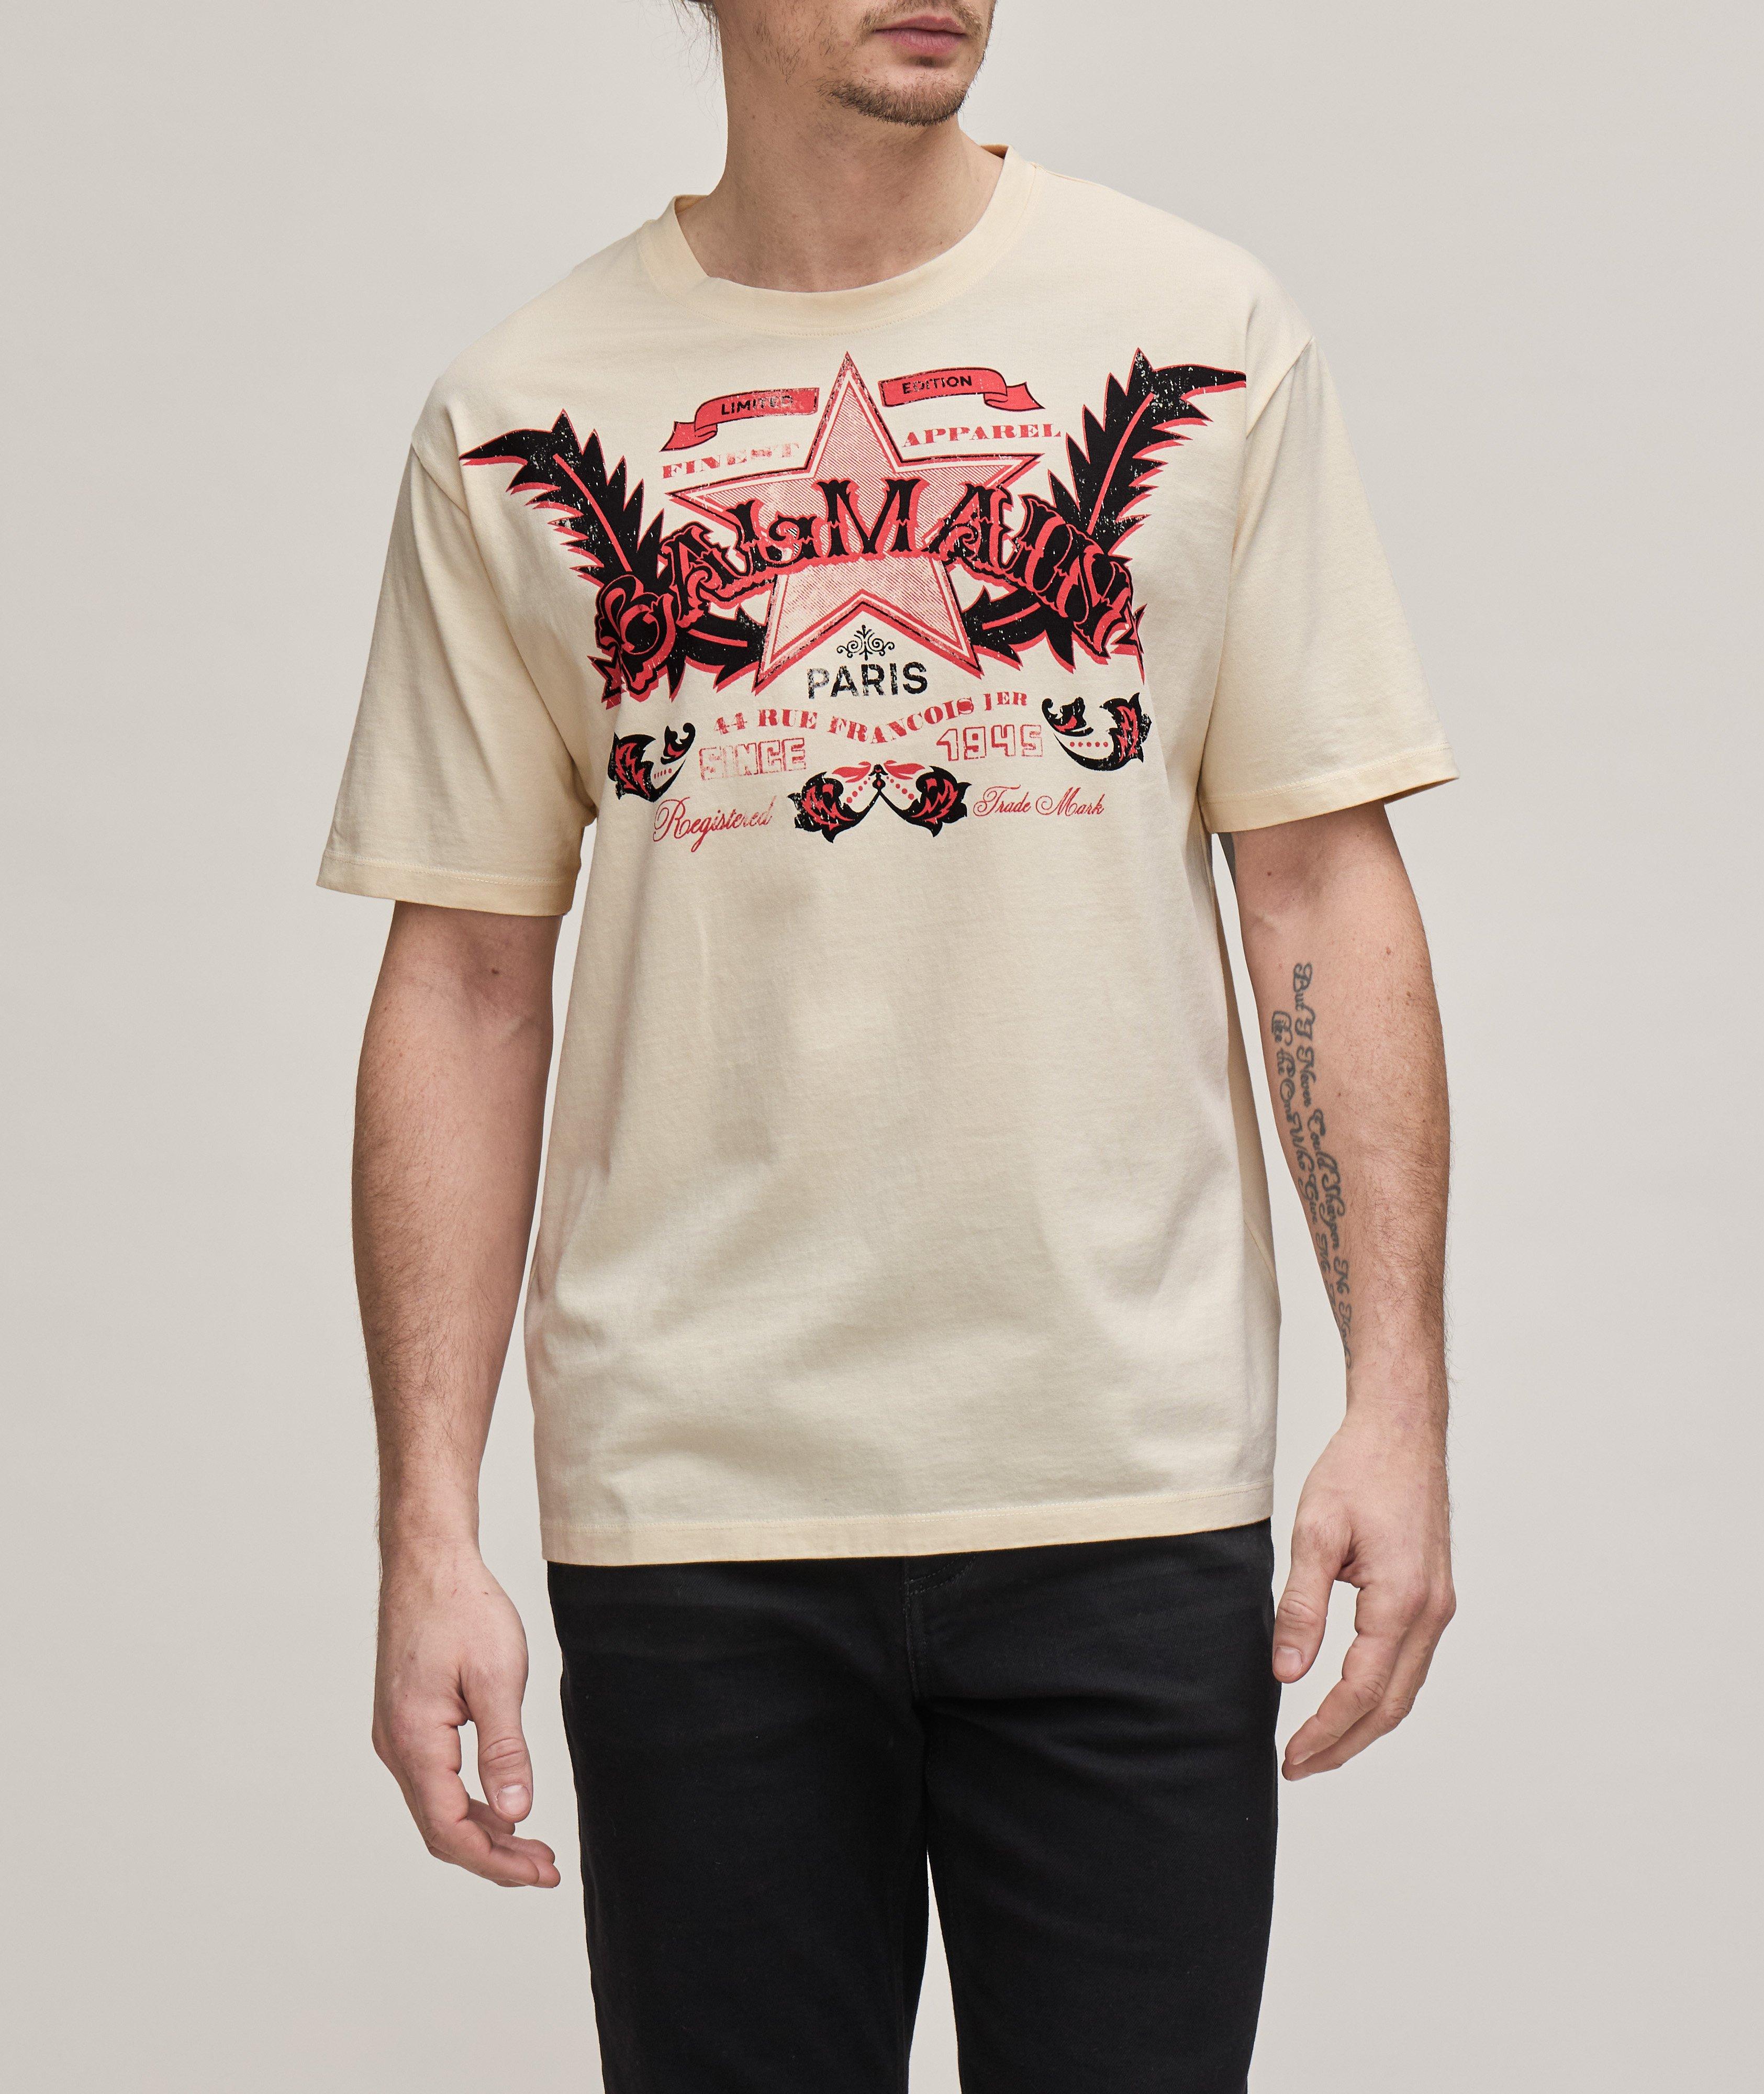 Western Traditional-Inspired Logo Cotton T-Shirt image 1